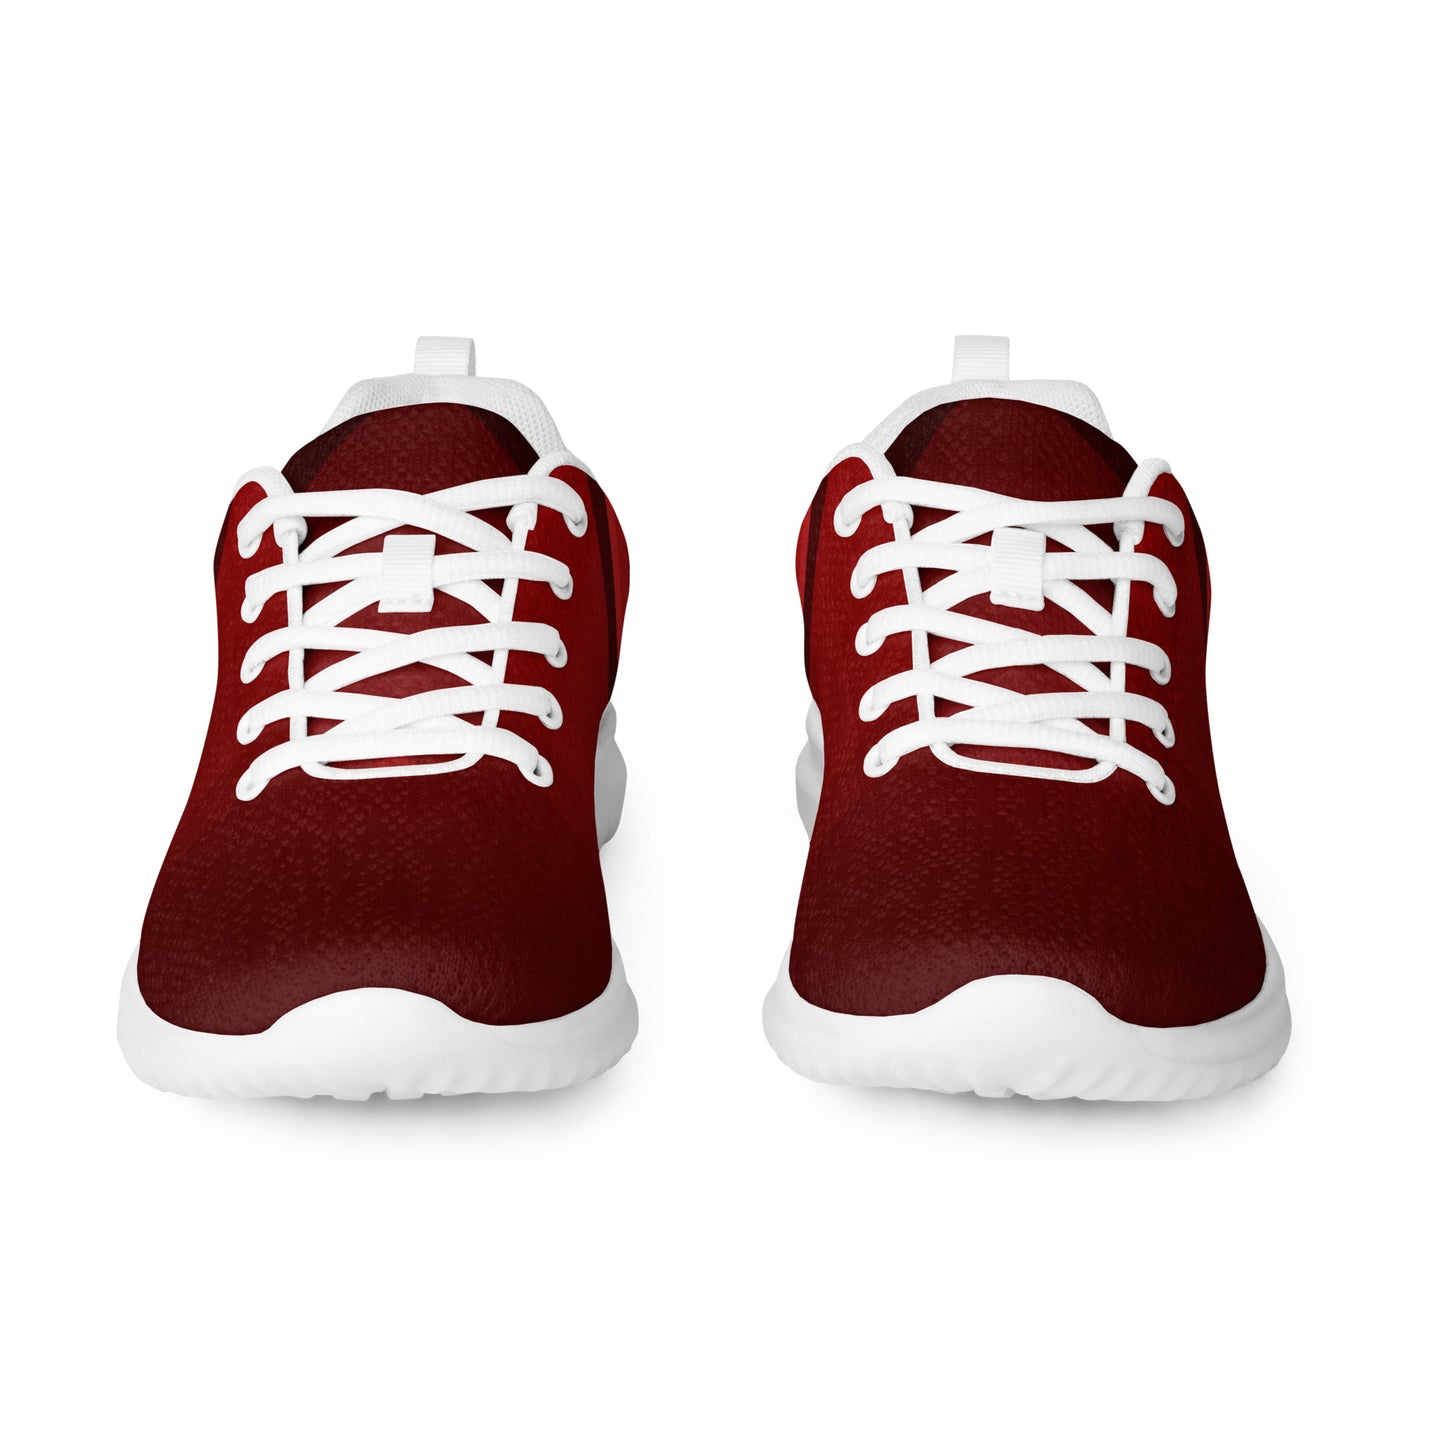 DASH Red Wine Men’s Athletic Shoes Lightweight Breathable Design by IOBI Original Apparel